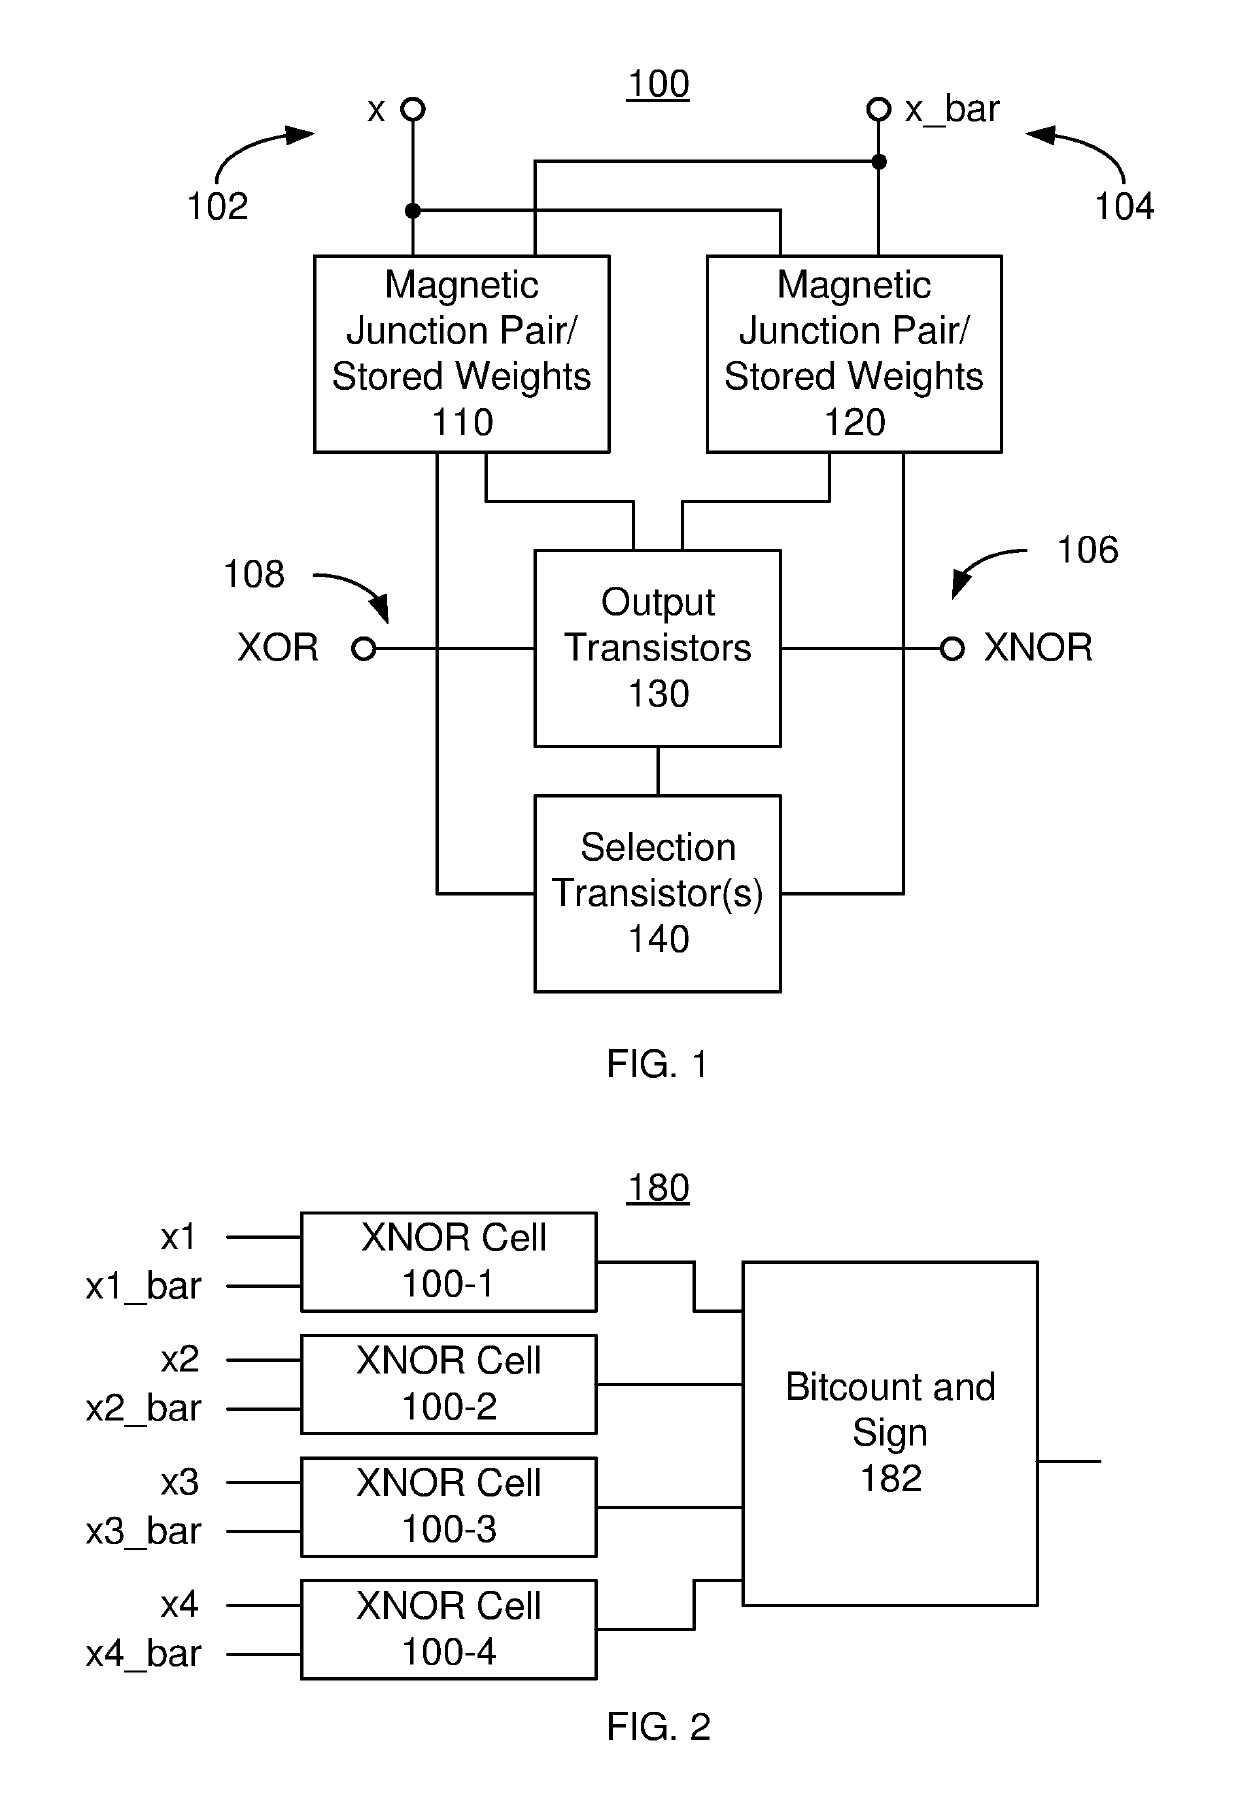 Method and system for providing a variation resistant magnetic junction-based xnor cell usable in neuromorphic computing